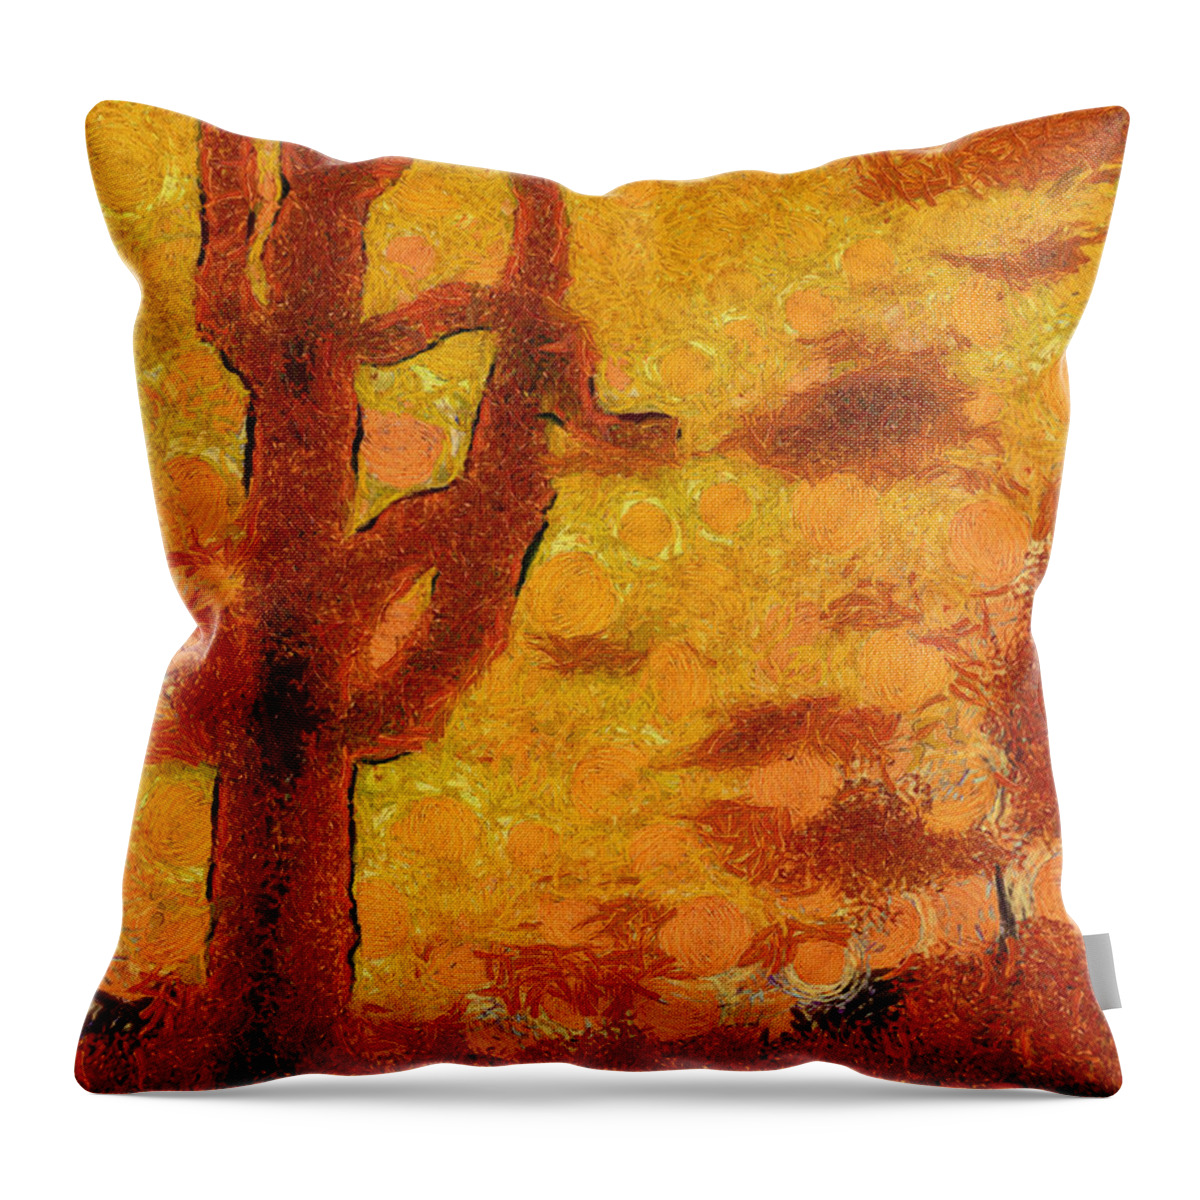 Cactus Throw Pillow featuring the photograph Desert Sunset Photo Art 04 by Thomas Woolworth